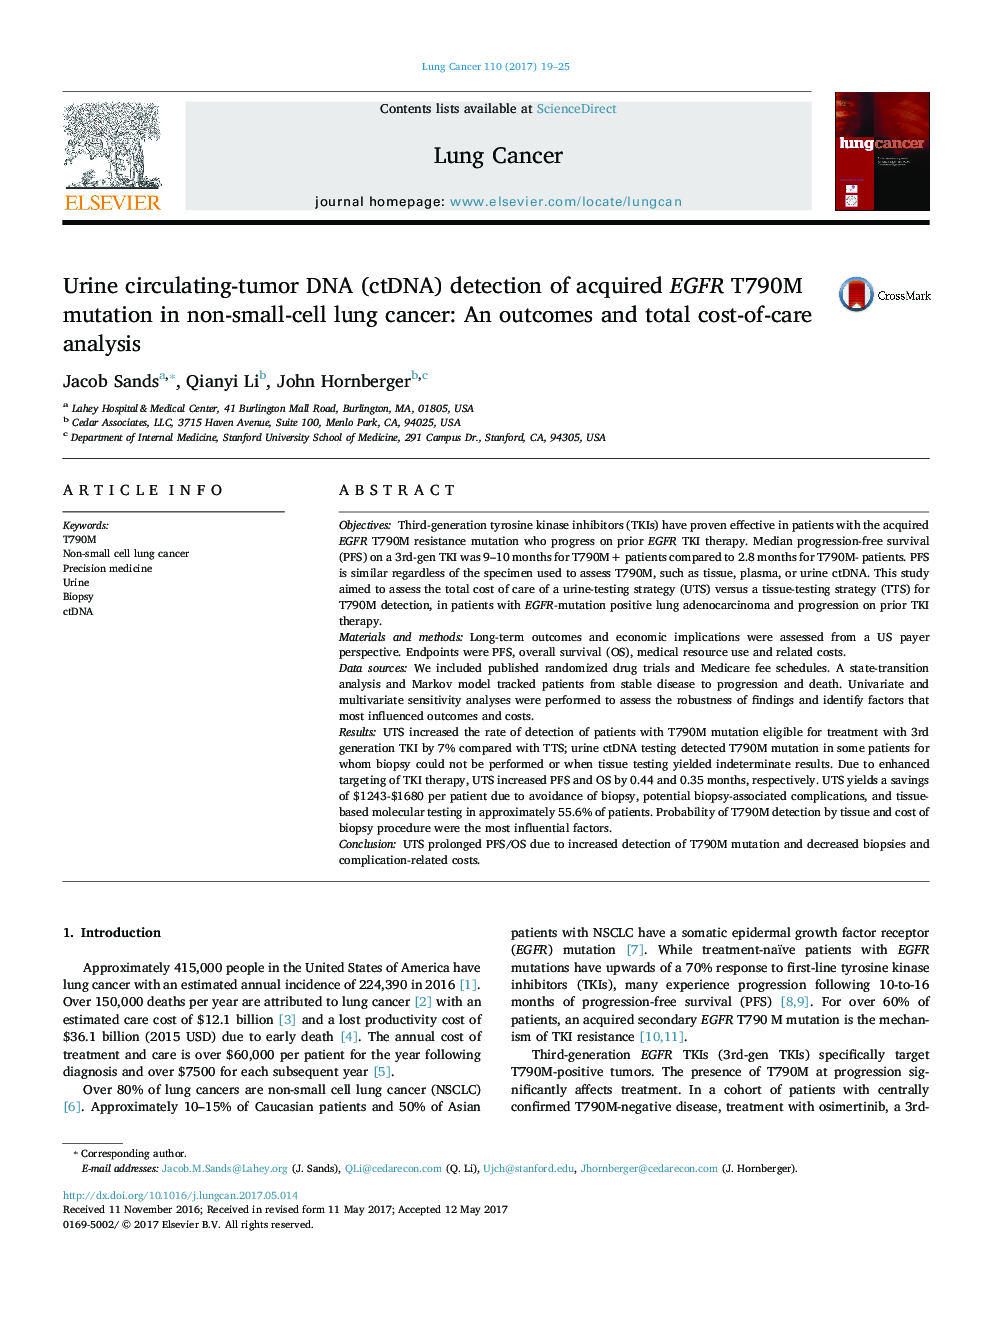 Urine circulating-tumor DNA (ctDNA) detection of acquired EGFR T790M mutation in non-small-cell lung cancer: An outcomes and total cost-of-care analysis